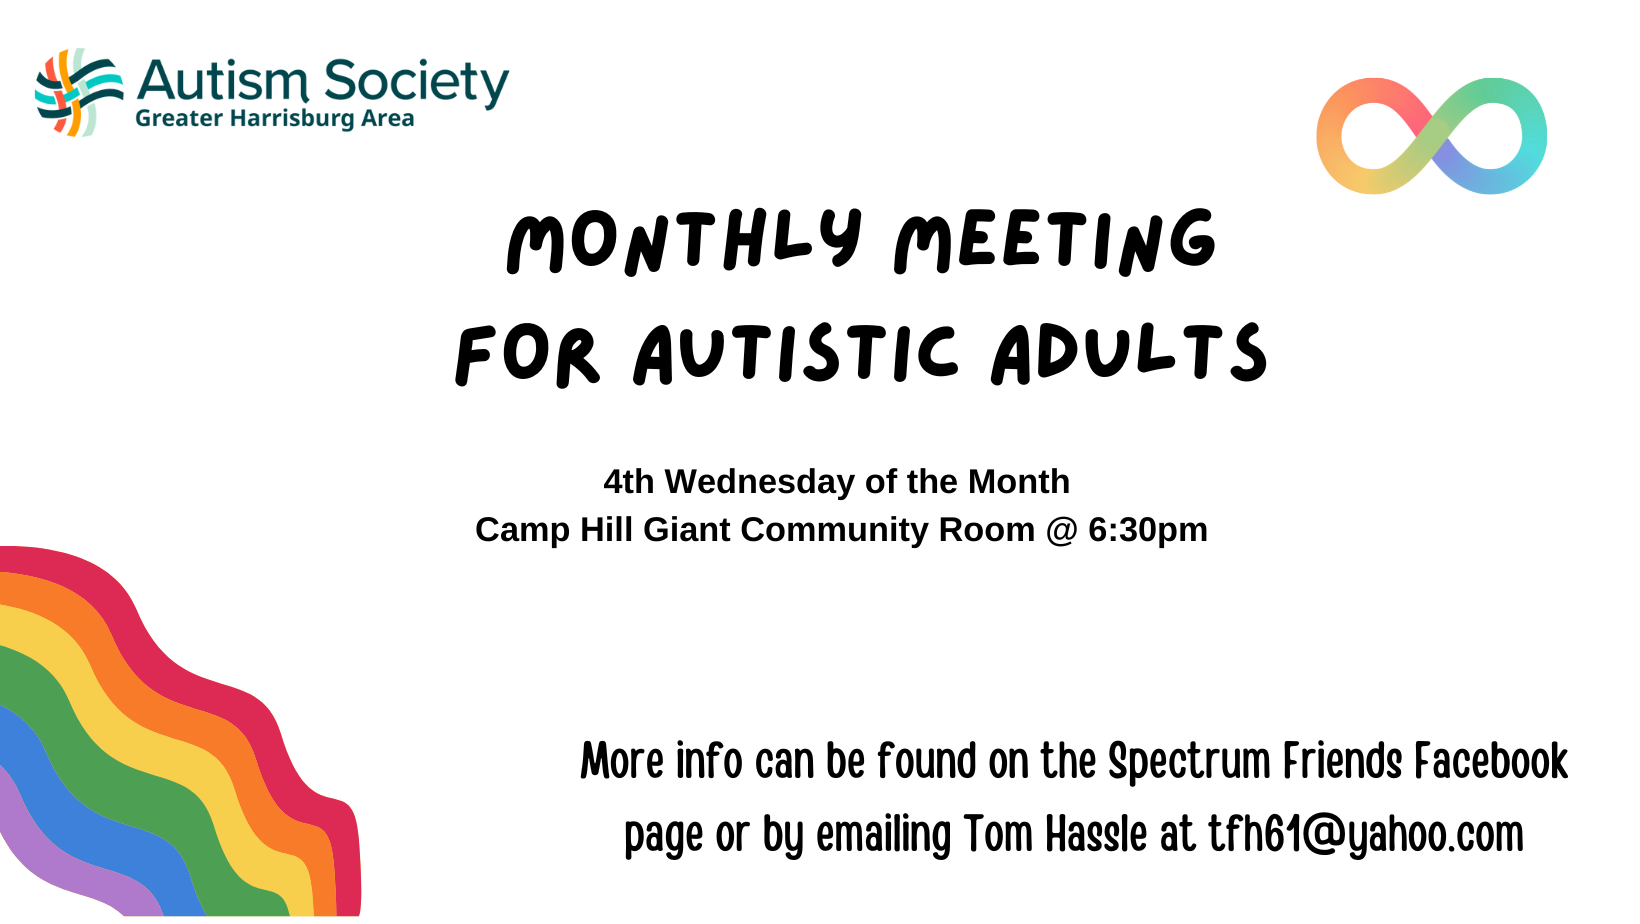 Spectrum Friends adult support group autism society harrisburg national autism society